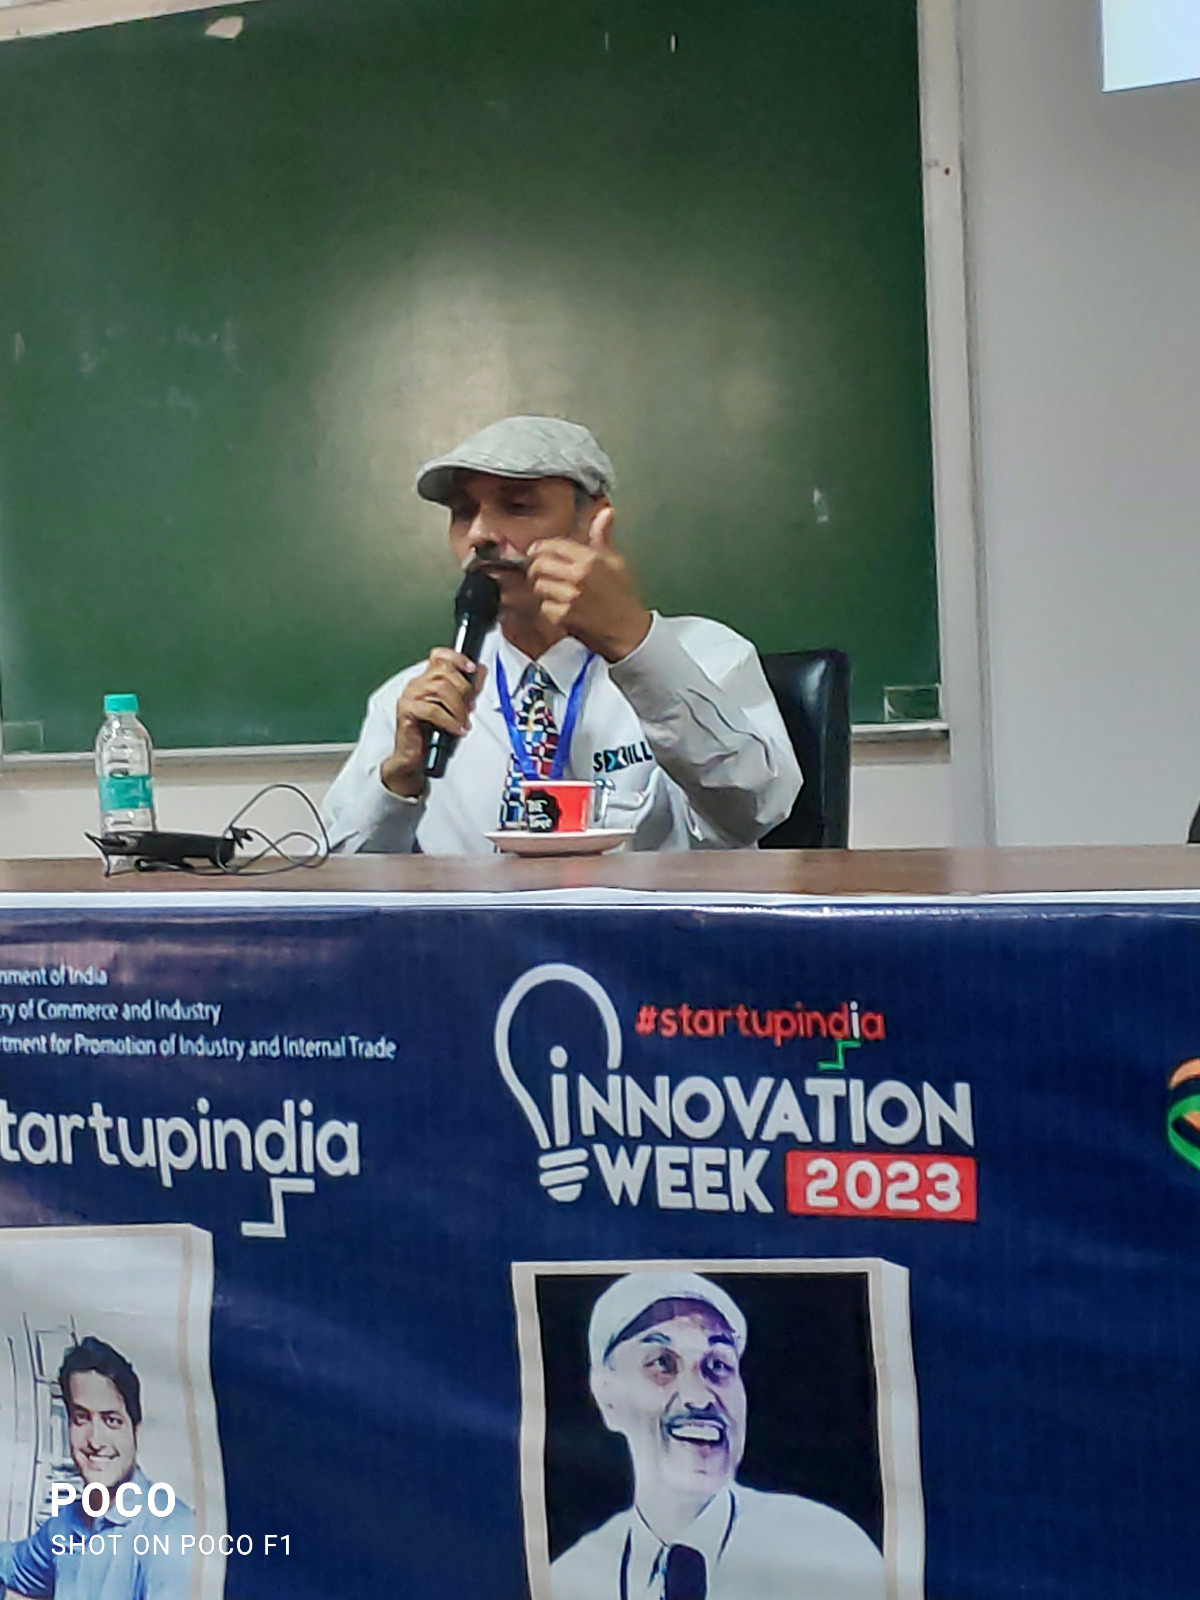 Worldskills Expert Prof. Vineet Raj Kapoor featured as a panelist in the discussion on “Founder’s Gyaan” held at the BITS Pilani Campus